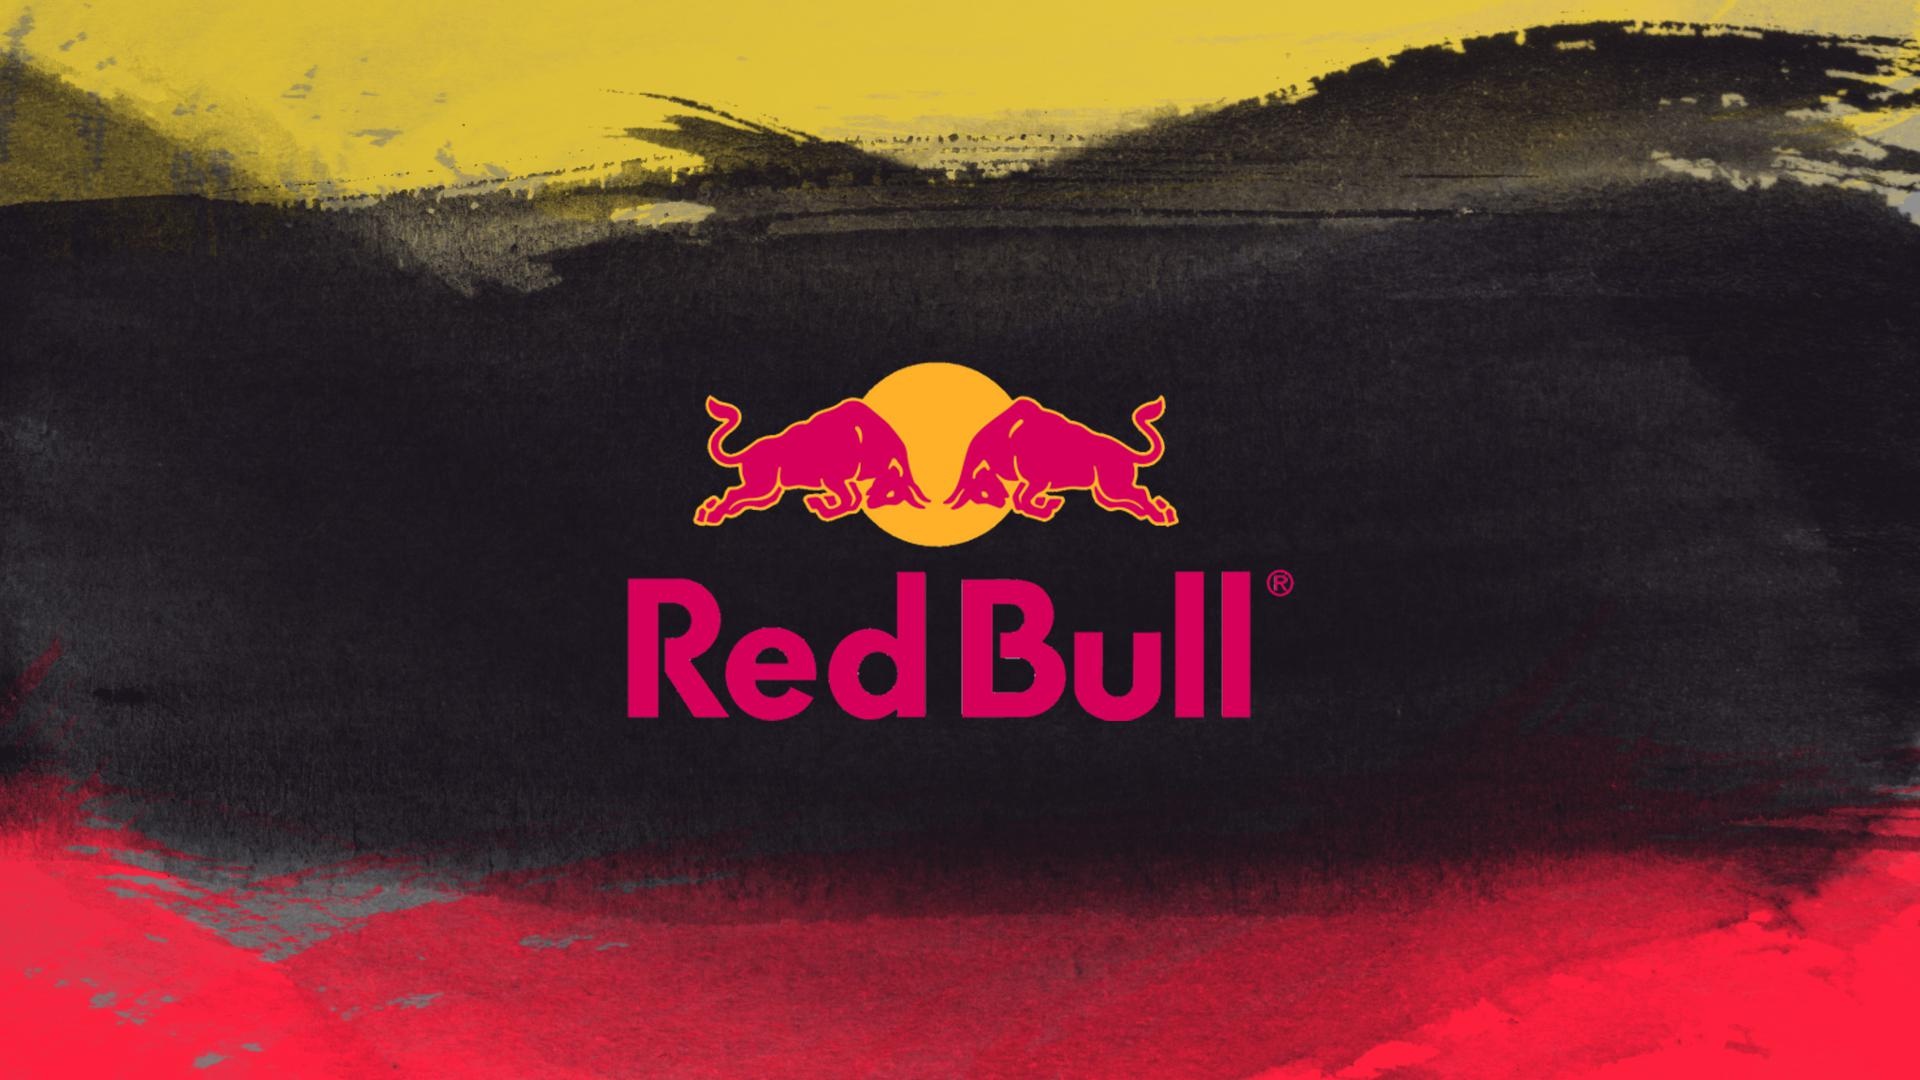 Red Bull Logo: A private company based in Salzburg, Austria, Energy drinks. 1920x1080 Full HD Wallpaper.